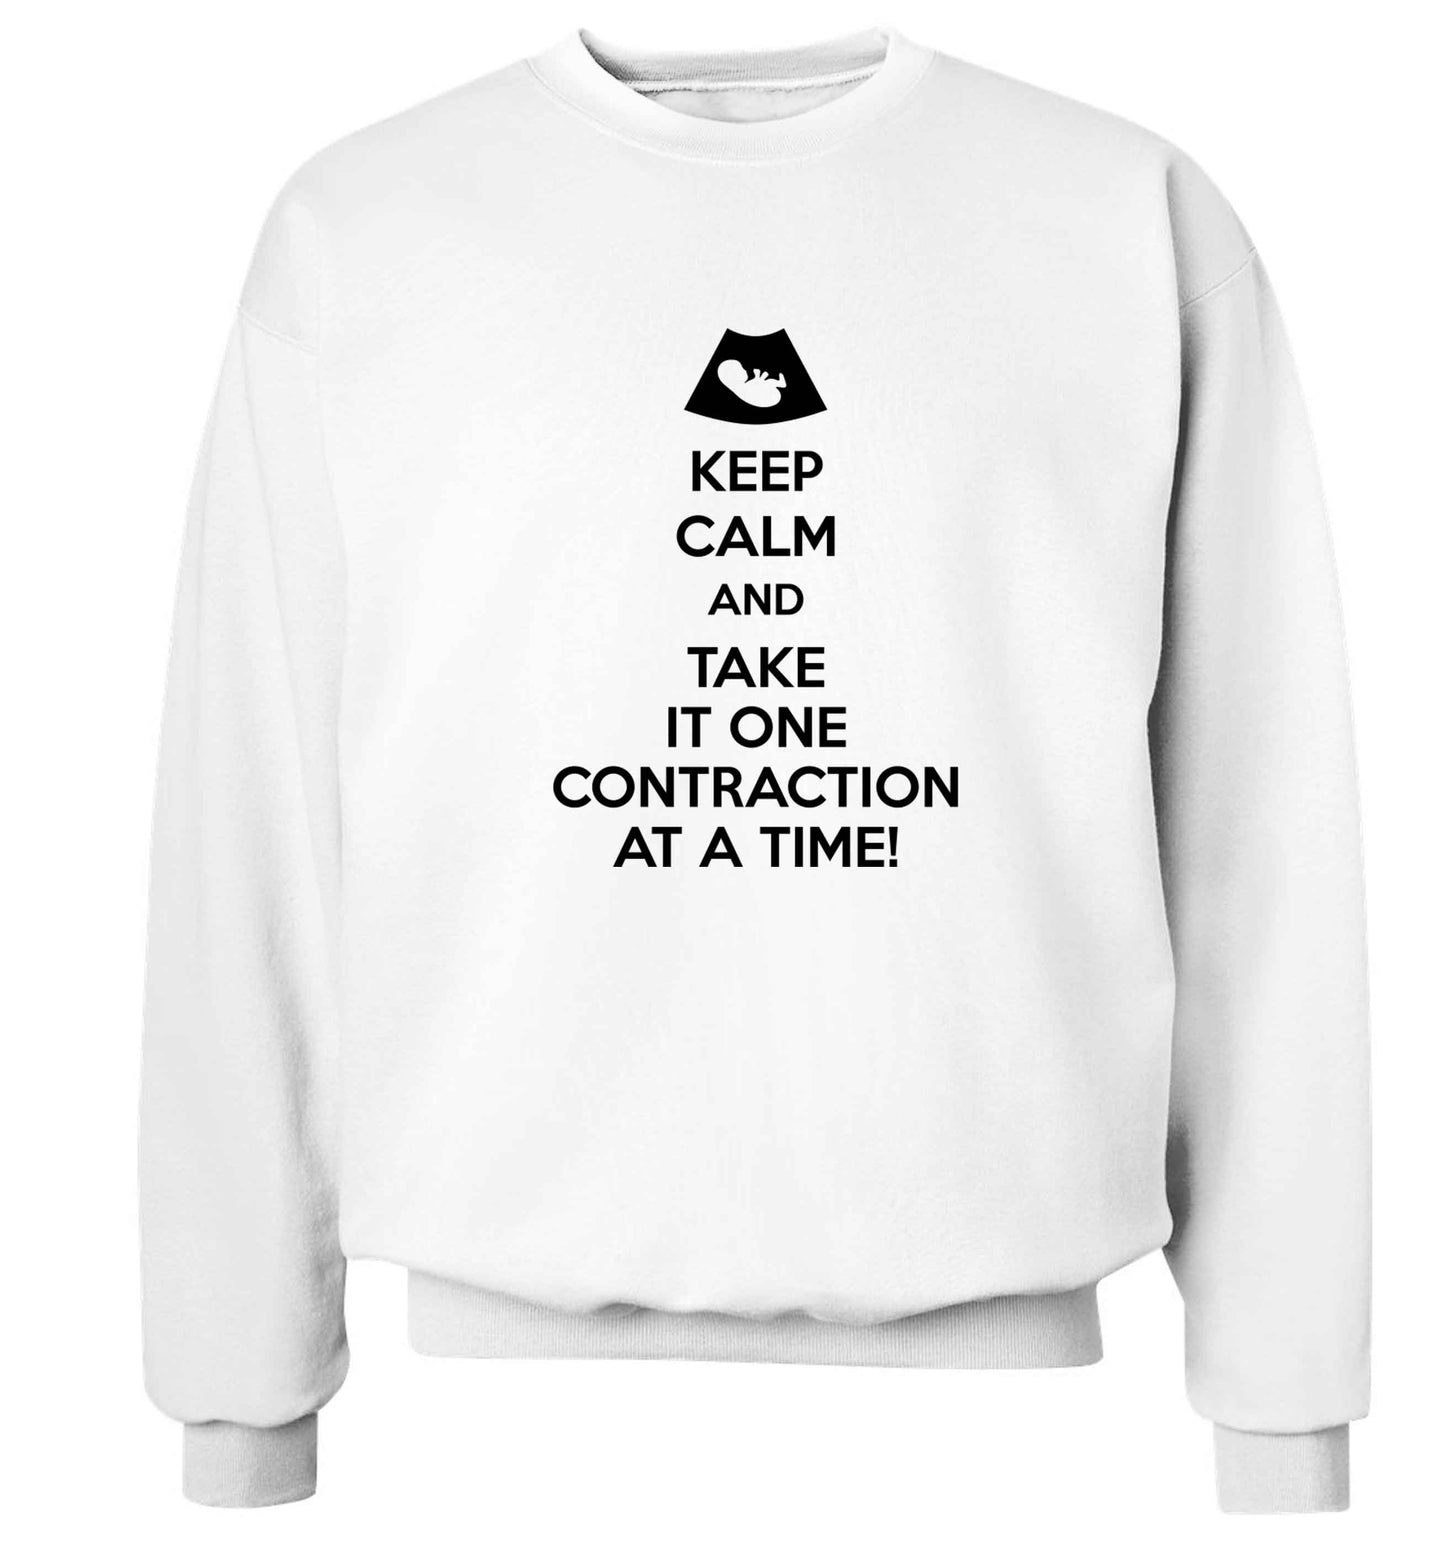 Keep calm and take it one contraction at a time Adult's unisex white Sweater 2XL